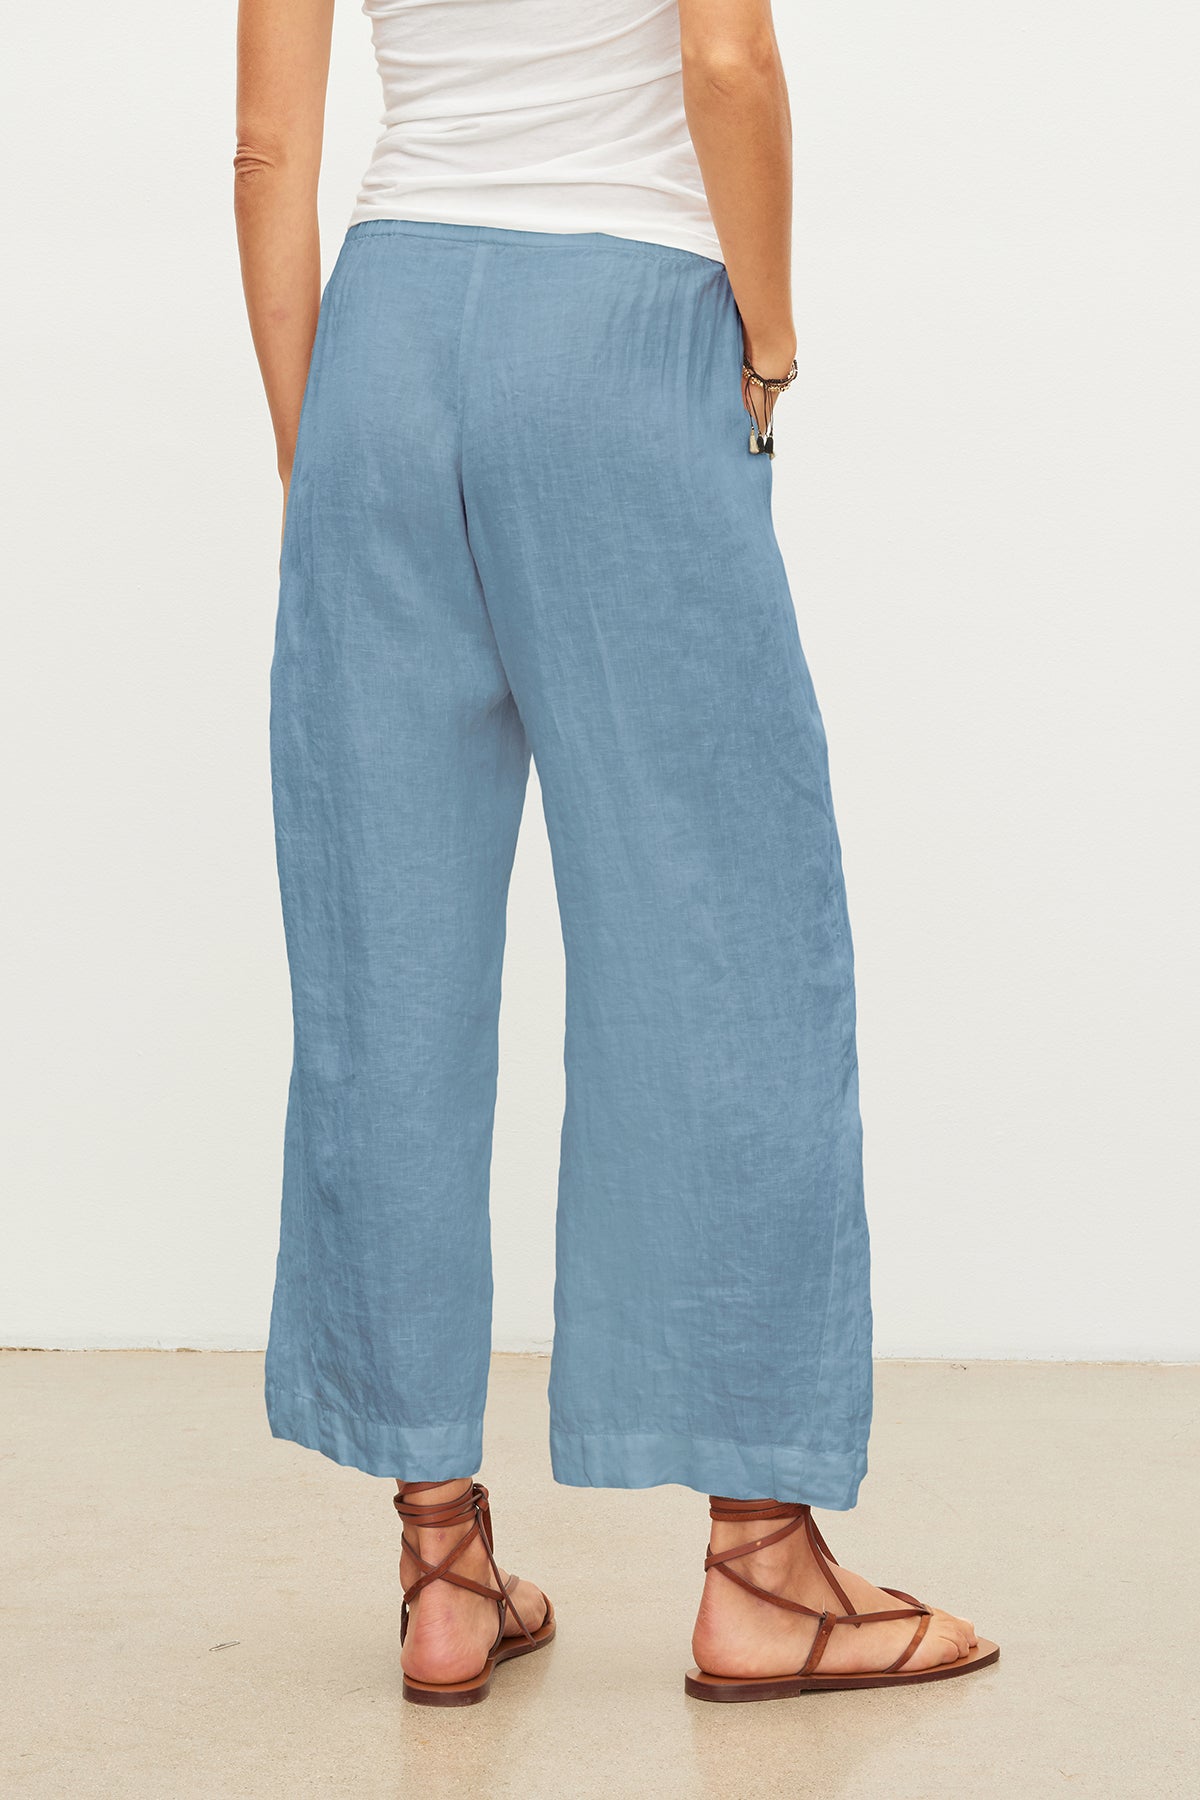   A person standing, wearing light blue wide-leg lightweight LOLA LINEN PANT by Velvet by Graham & Spencer, a white top, and brown sandals. The photo is taken from behind, showing the full length of the relaxed leg crops and sandals. 